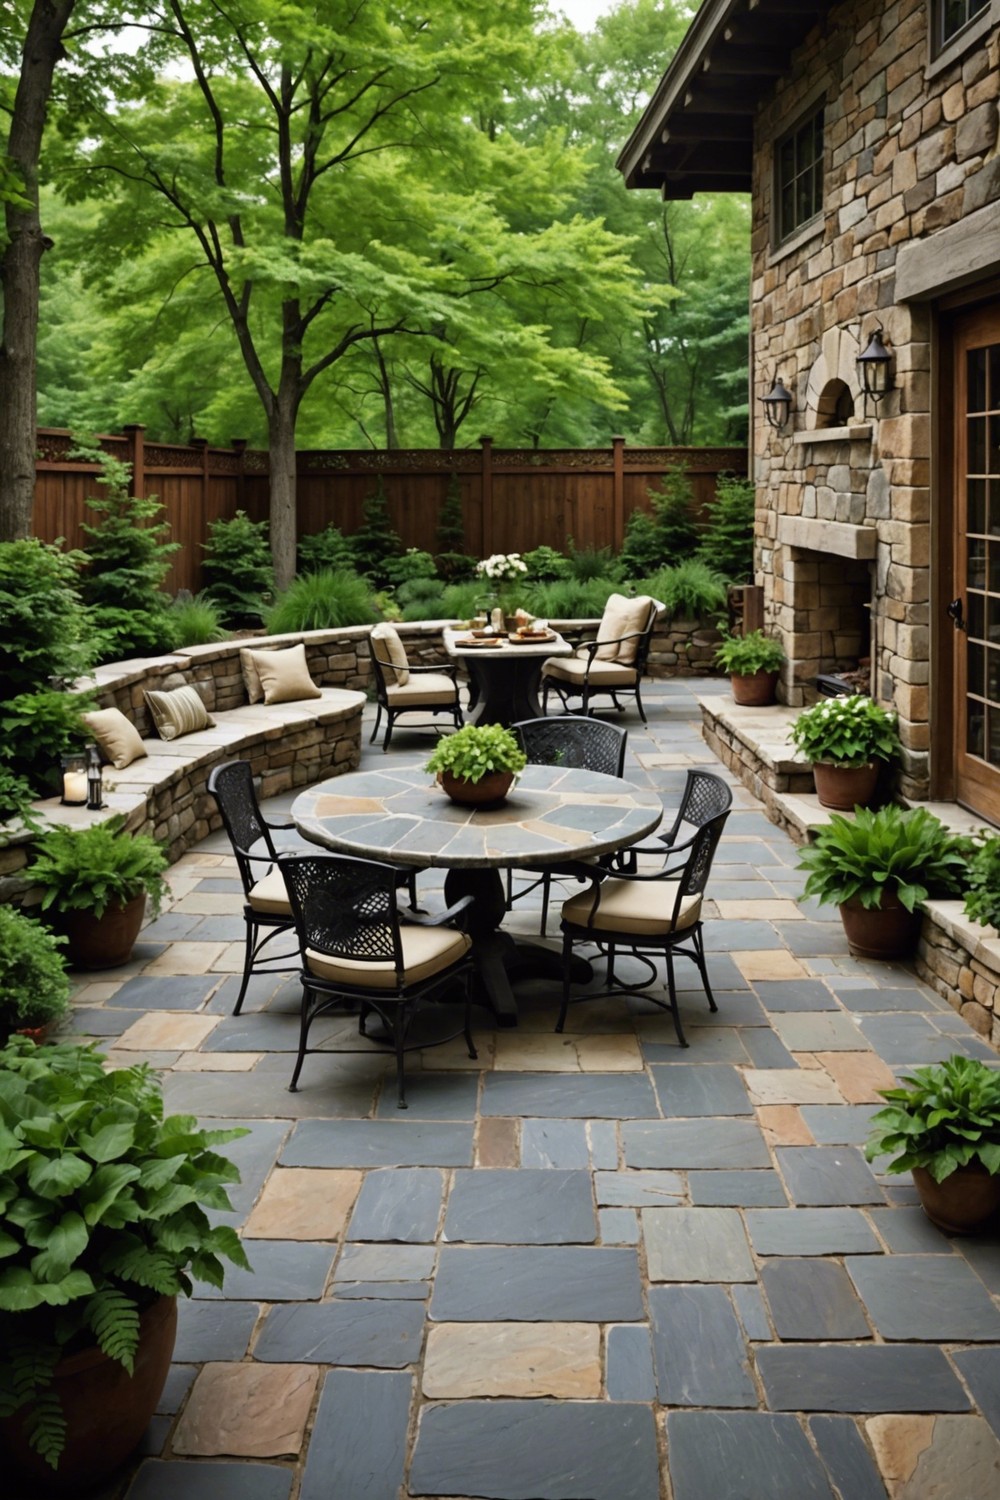 Natural Stone Flooring for a Rustic Patio